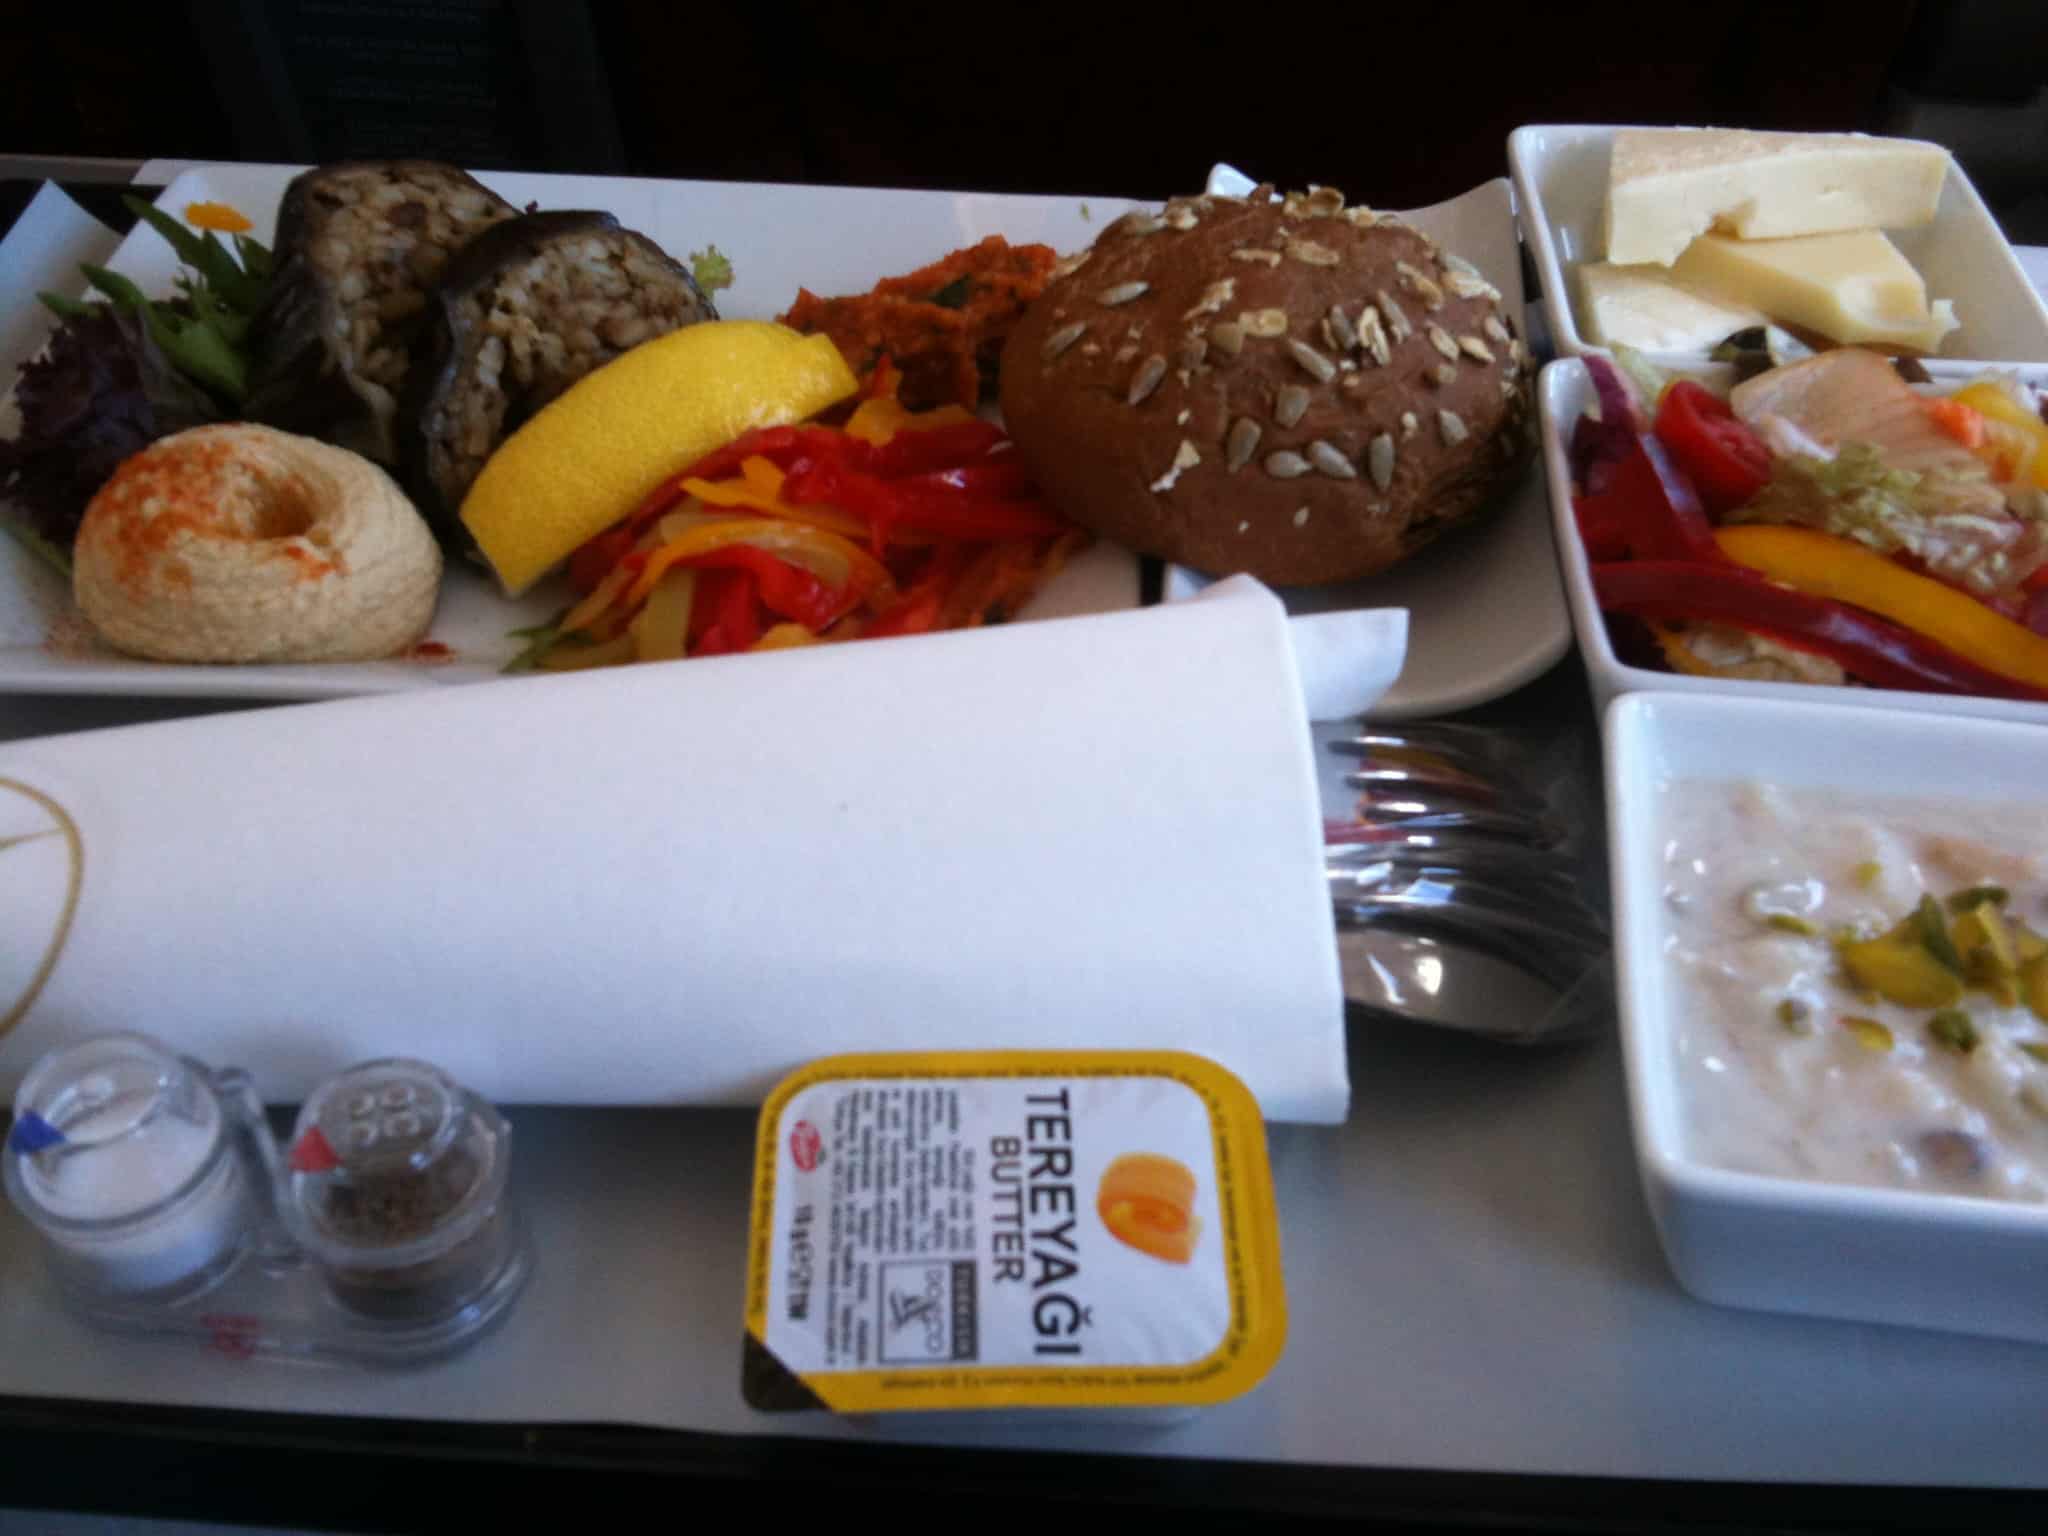 Turkish airlines business class, Turkish airlines food, Turkish airlines review